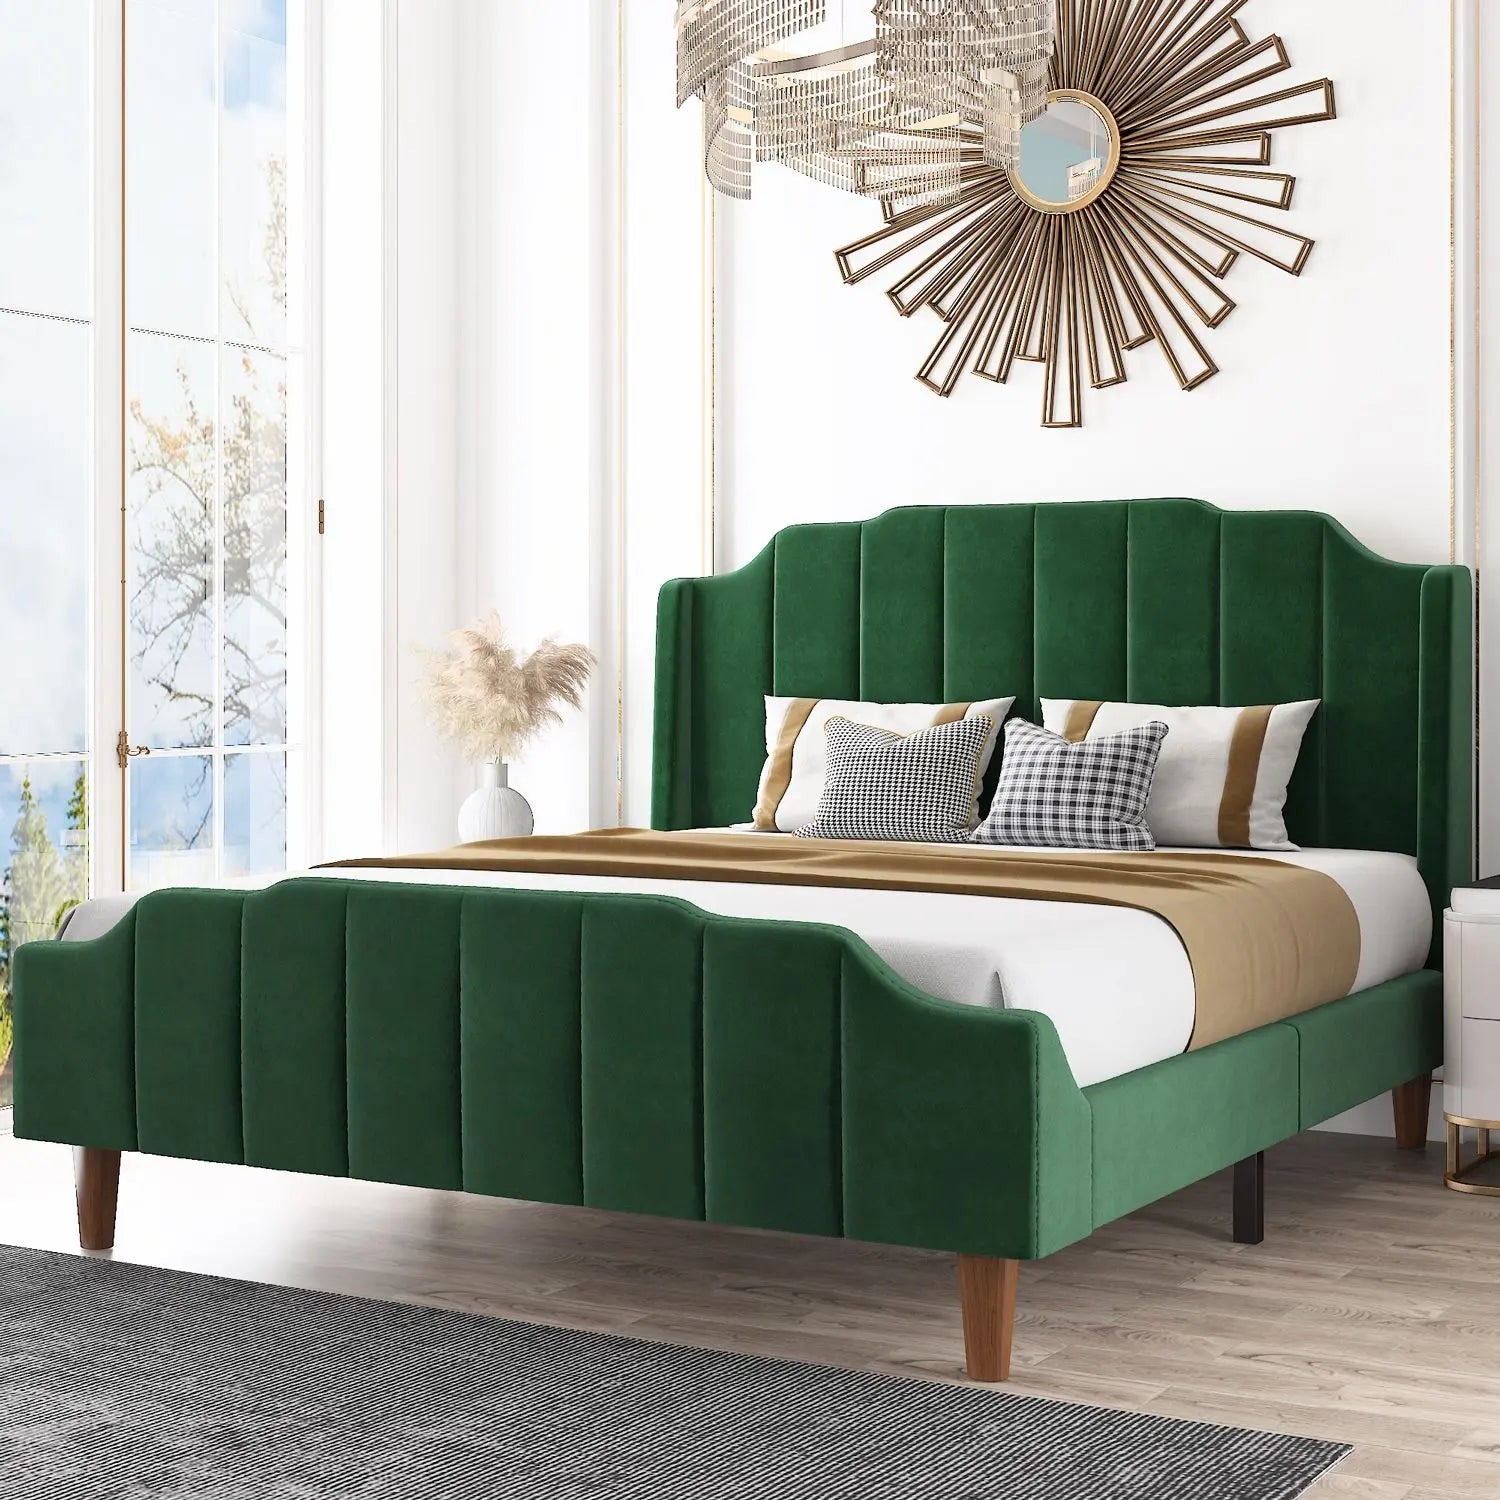 Emerald Green Luxury Wood Bed with Headboard | king/Queen size bed with storage ANGIE HOMES